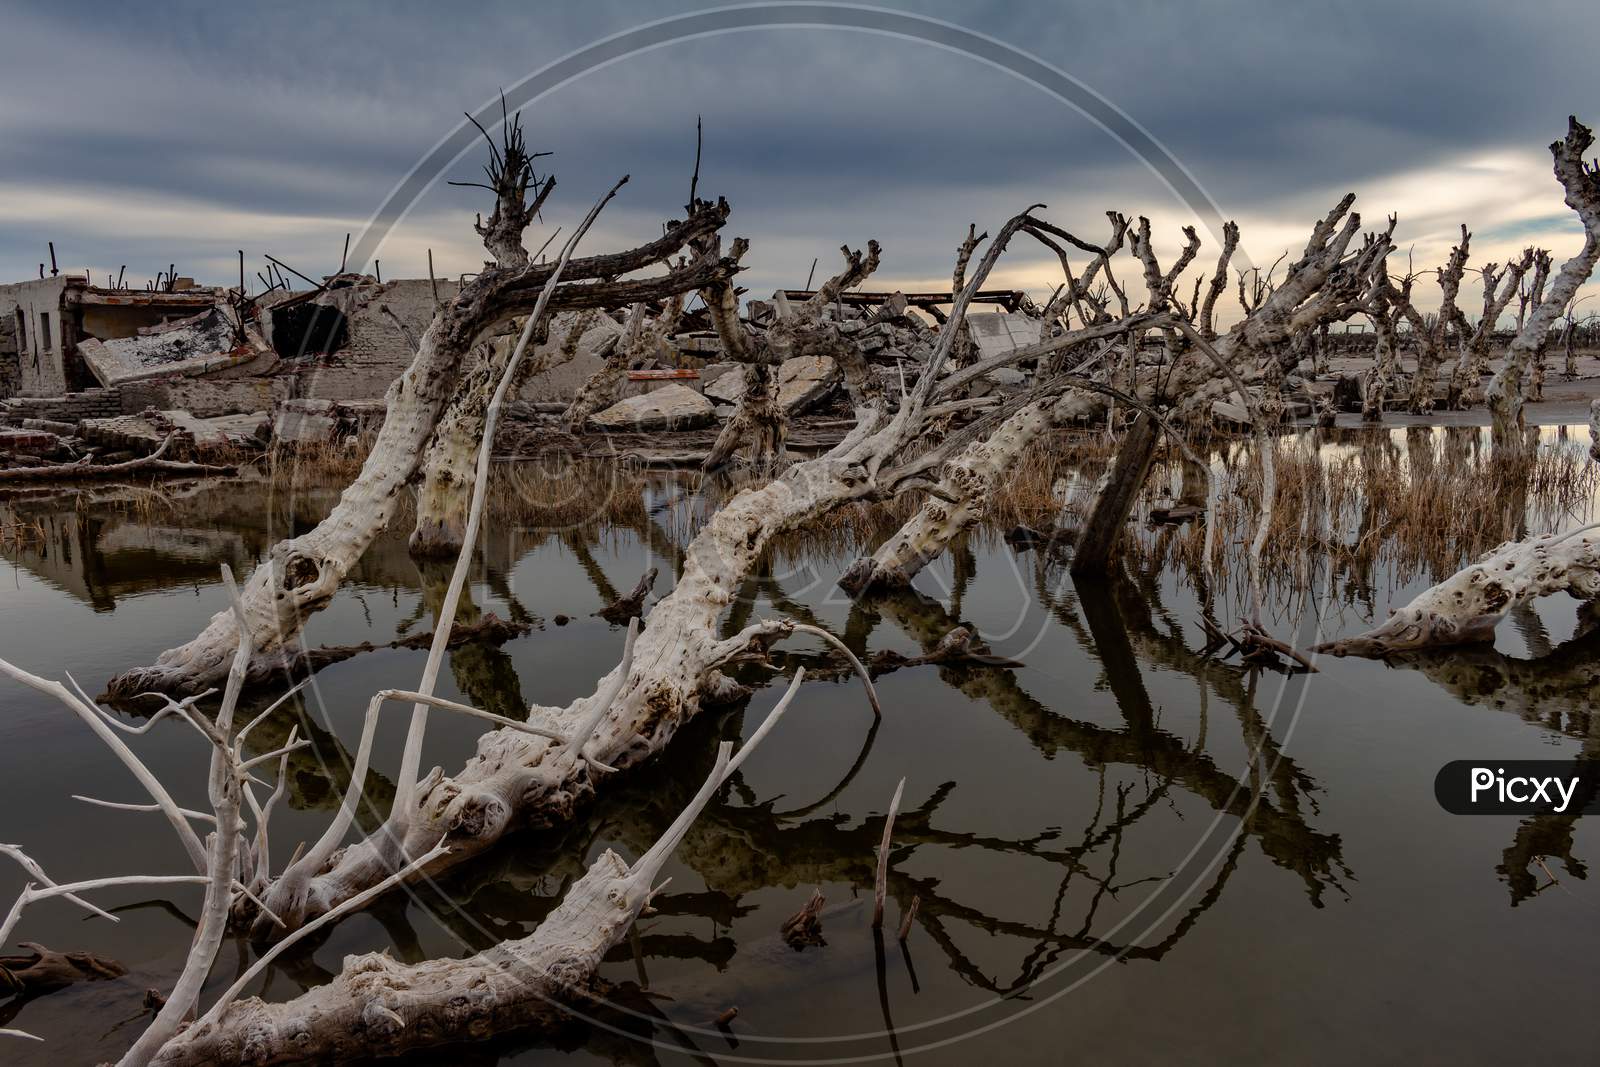 Dead Trees In The Abandoned City Of Epecuen. Flood That Destroyed The City And Left It In Ruins. Desolate Urban Landscape.